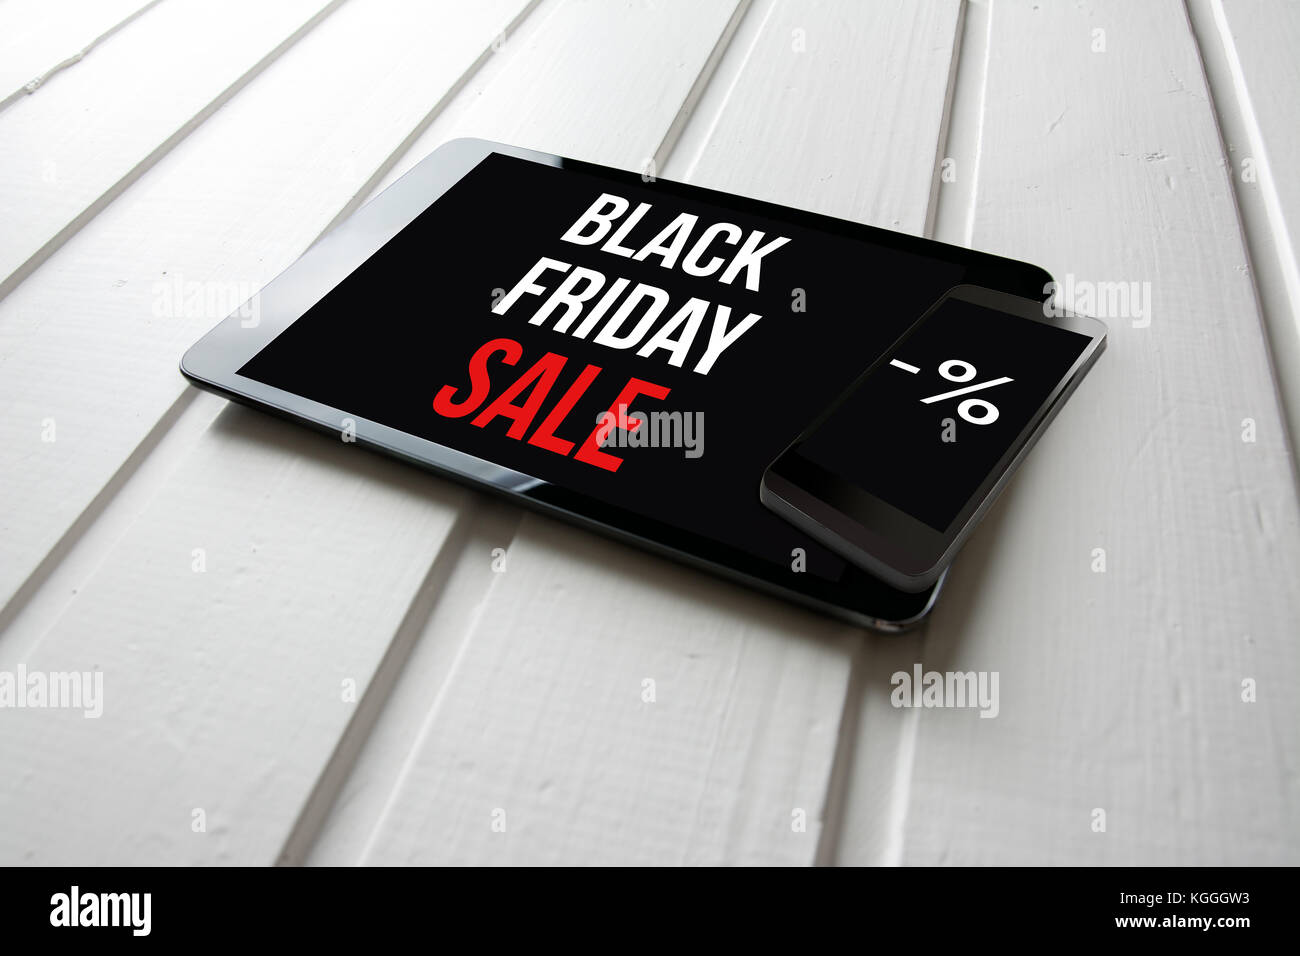 Black friday sale promotion on computer tablet screen, on white wood, online shopping concept. Stock Photo